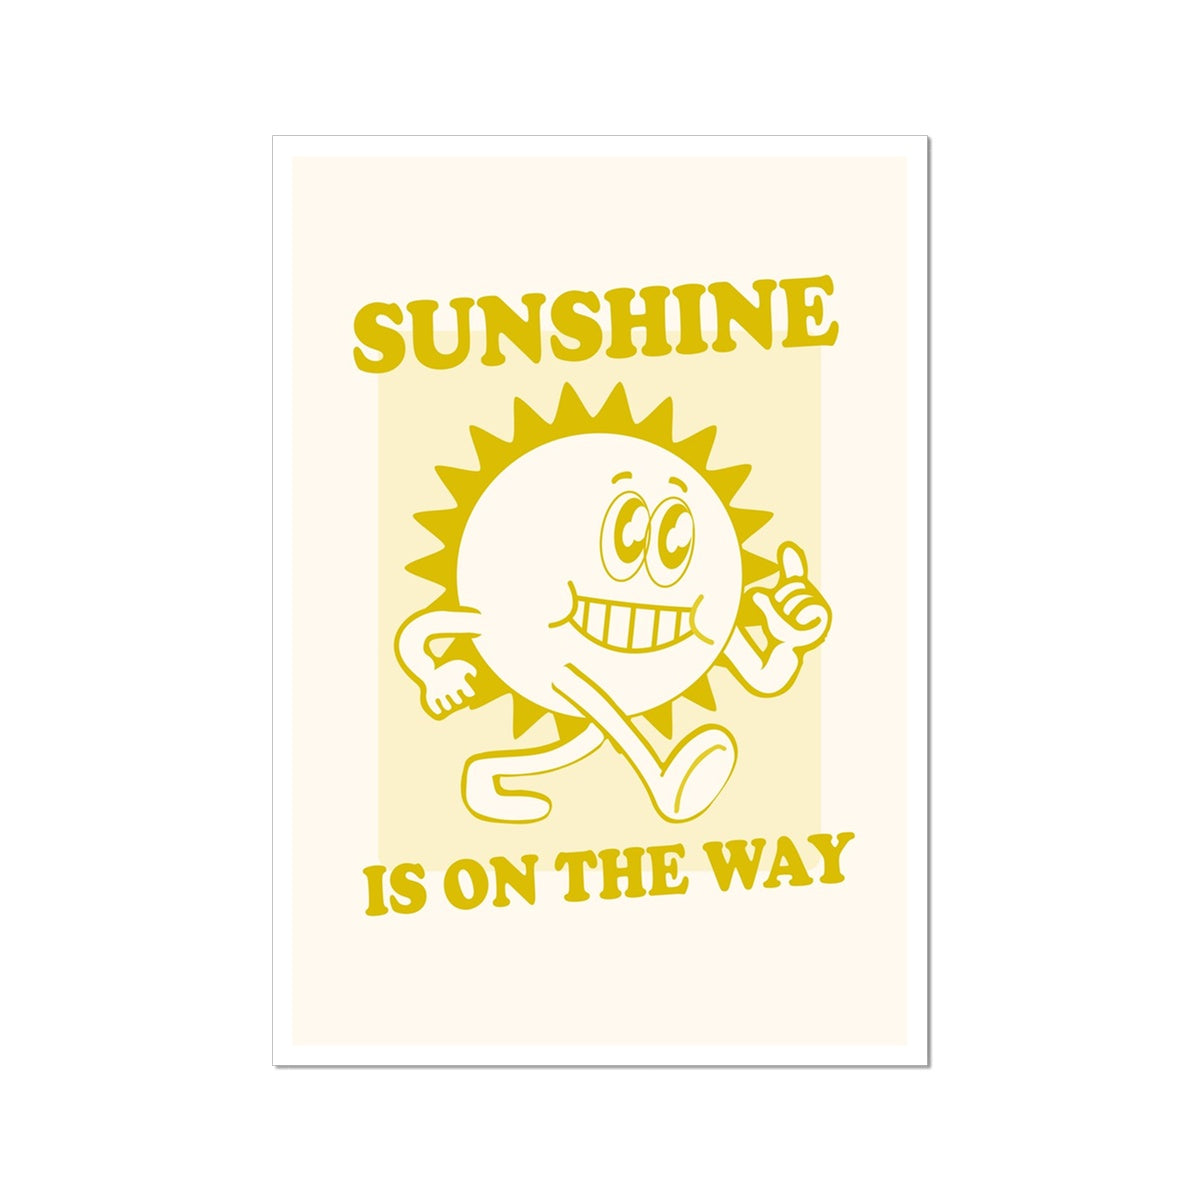 Sunshine Is On The Way - Vintage Cartoon Collection - Wall Art Poster Print Retro Mantra Positive Vibes Office Home Remote Work Wall Art Poster